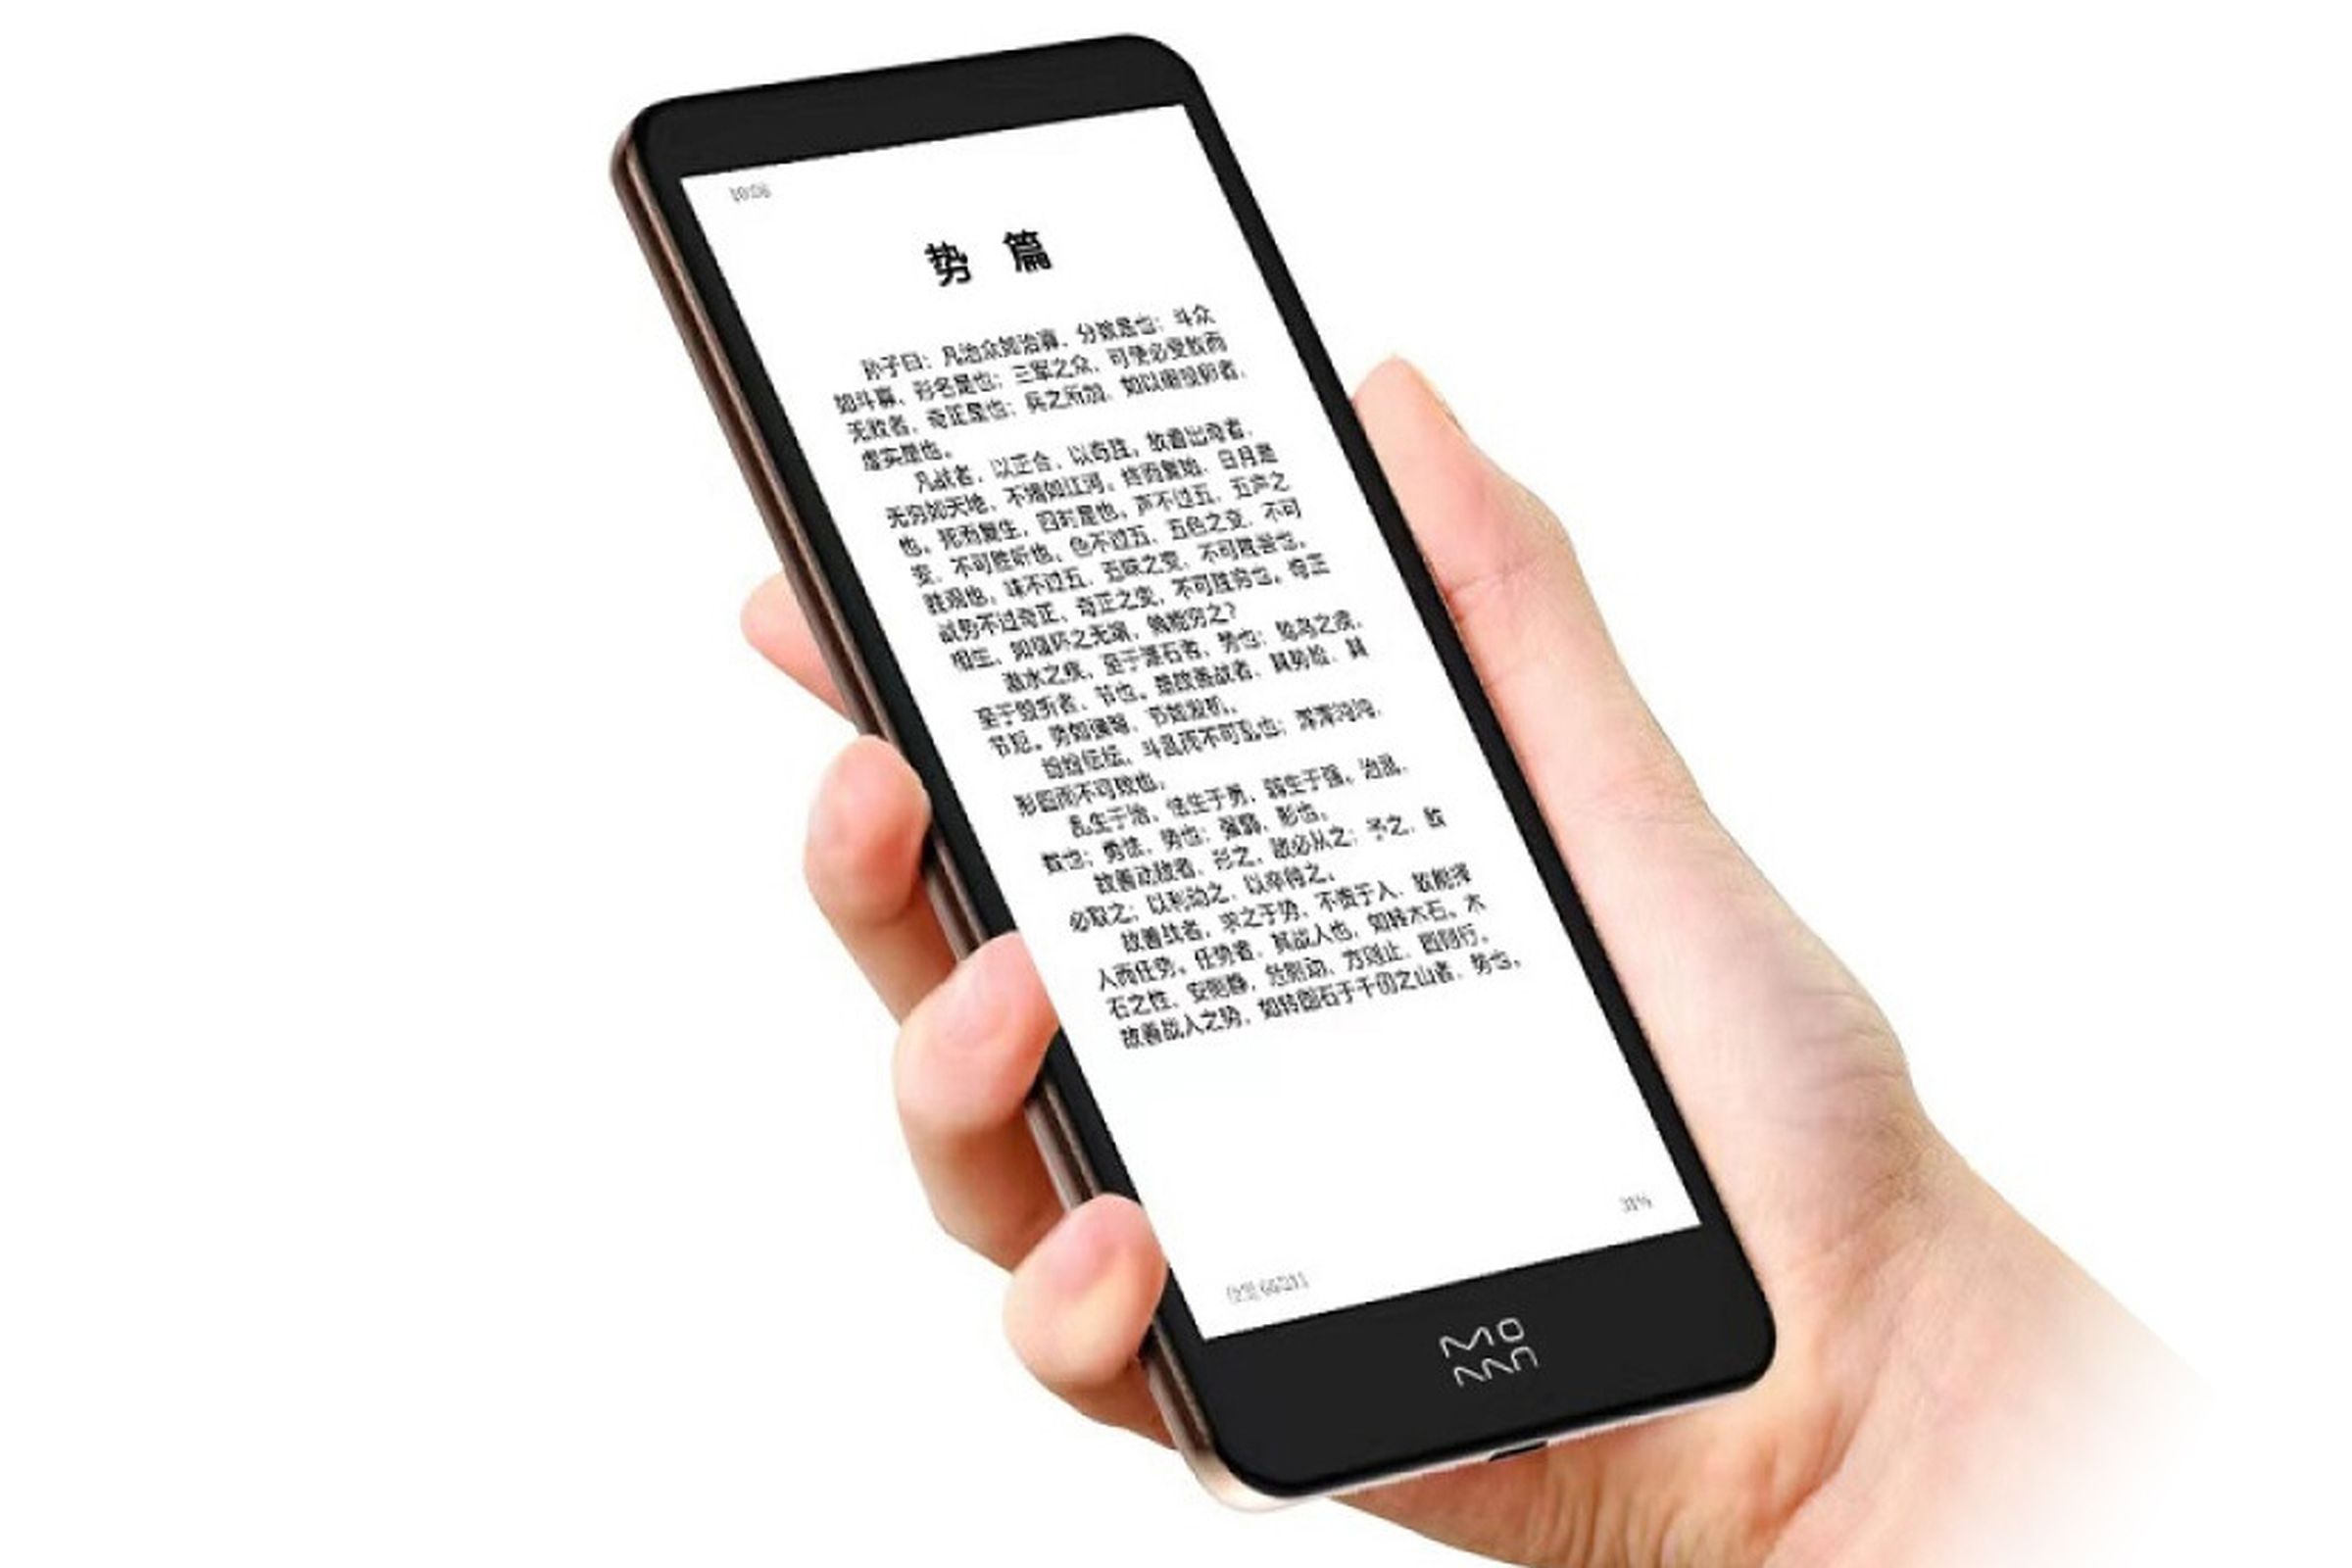 The Xiaomi Moaan InkPalm Plus e-reader being held in a user’s hand with text onscreen.